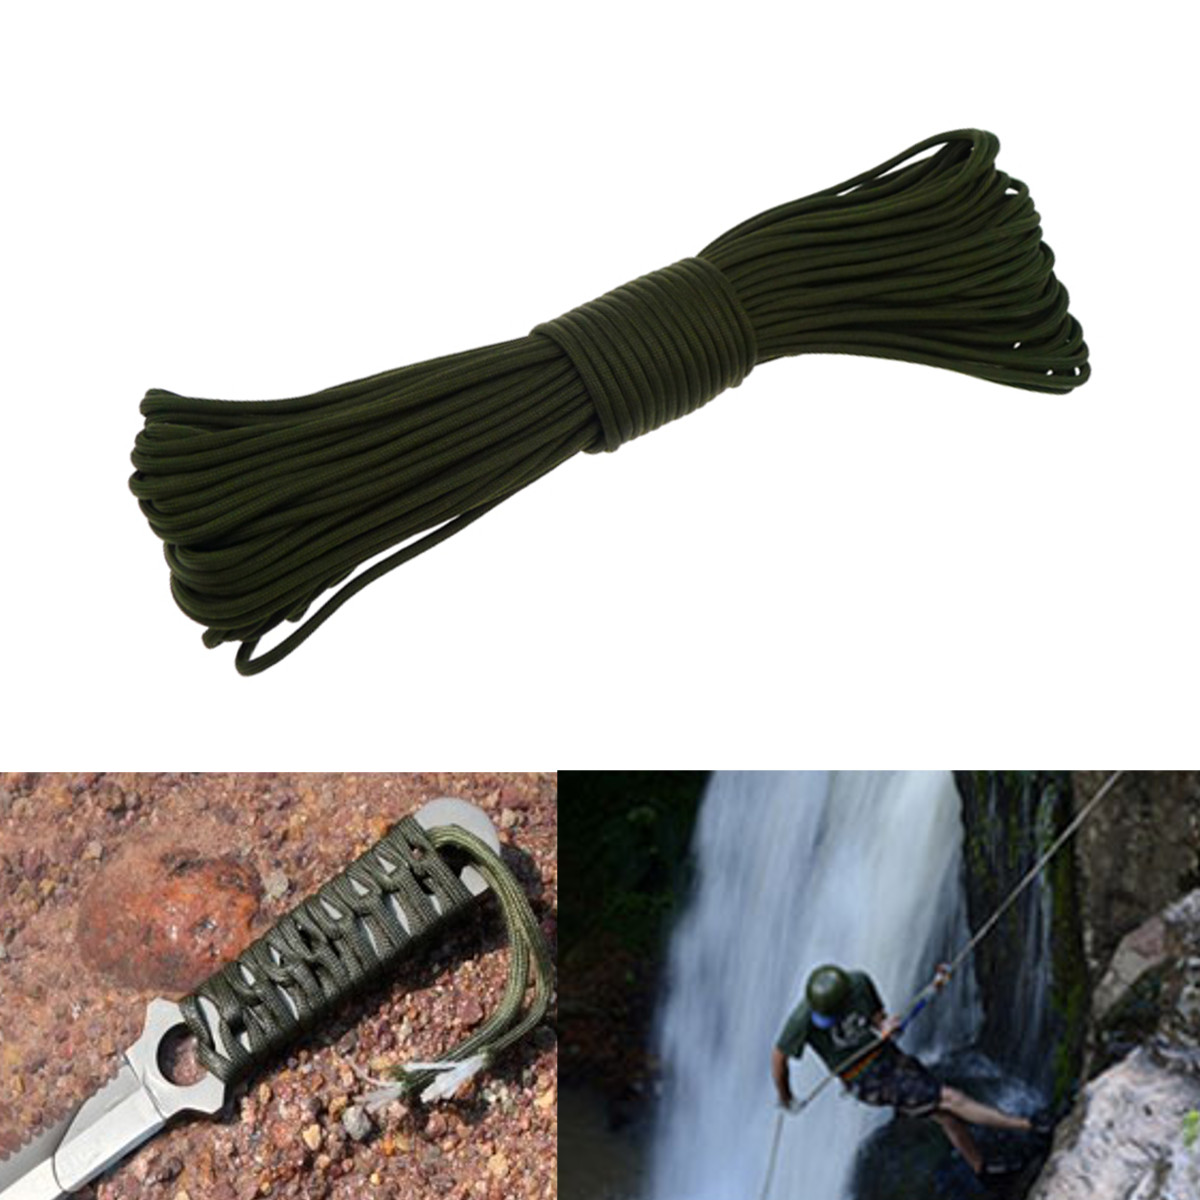 100FT30M-550lb-Paracord-Parachute-Lanyard-7-Strand-Core-Emergency-Army-Green-Rope-1222900-1